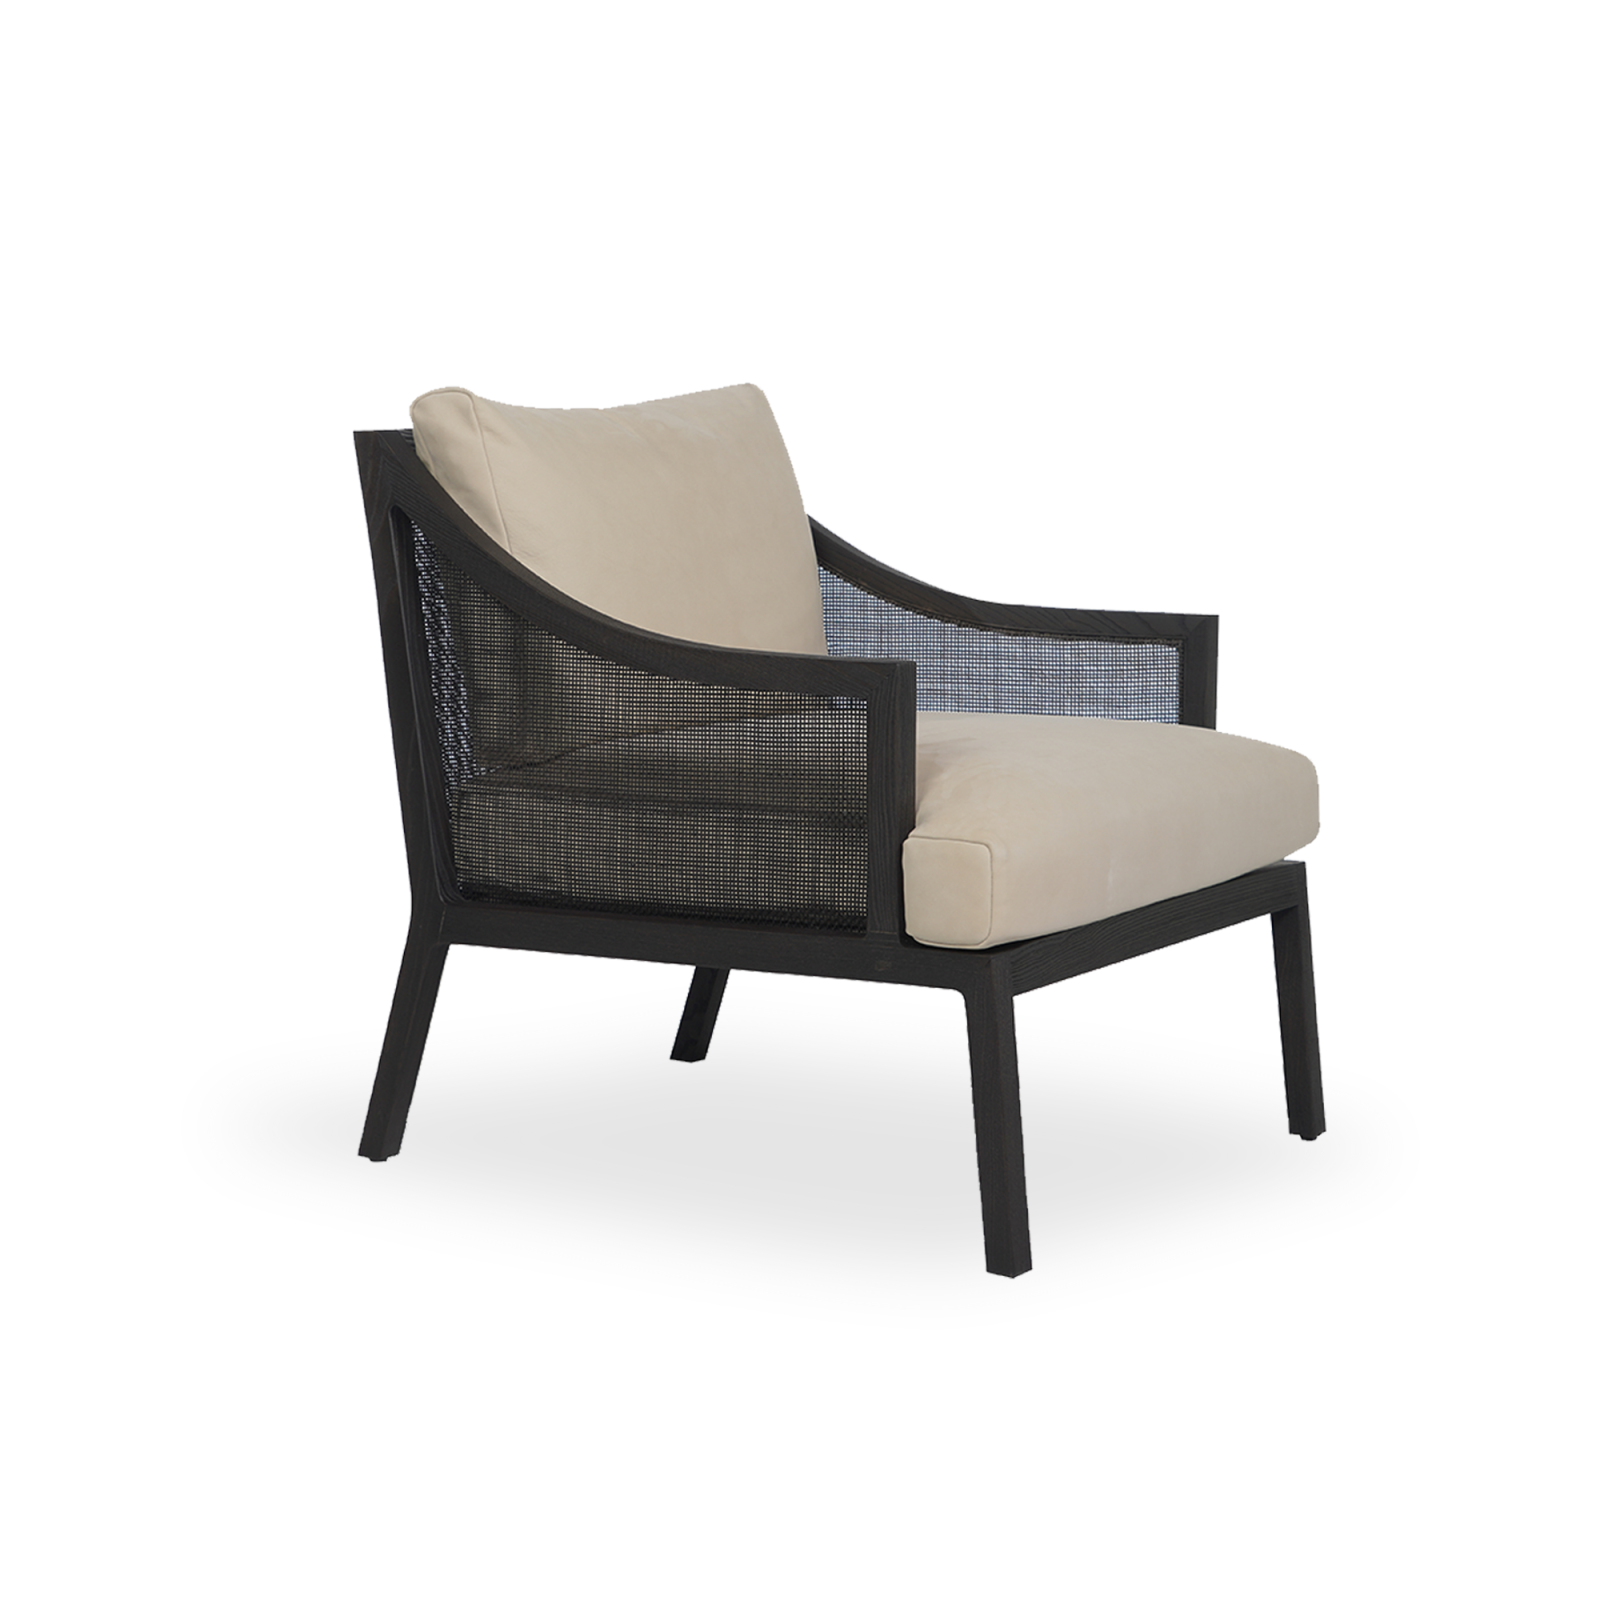 Combining the goose feather detail preferred in the sitting part with the comfort of the back cushion, Tolouse Armchair